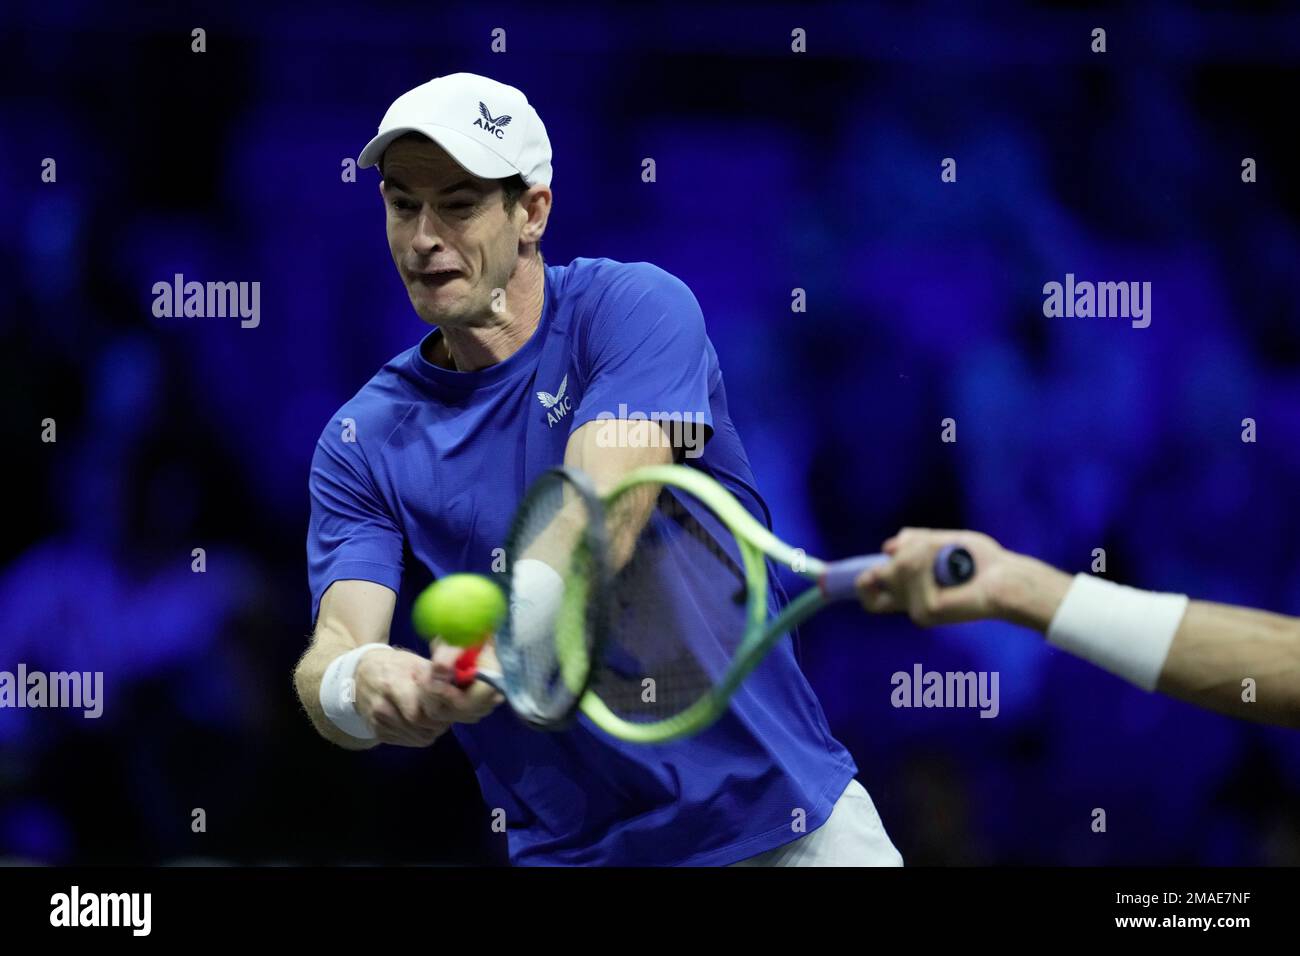 Team Europes Andy Murray crashes his racket to Matteo Berrettini as he returns a ball to Team Worlds Jack Sock and Felix Auger-Aliassime on final day of the Laver Cup tennis tournament